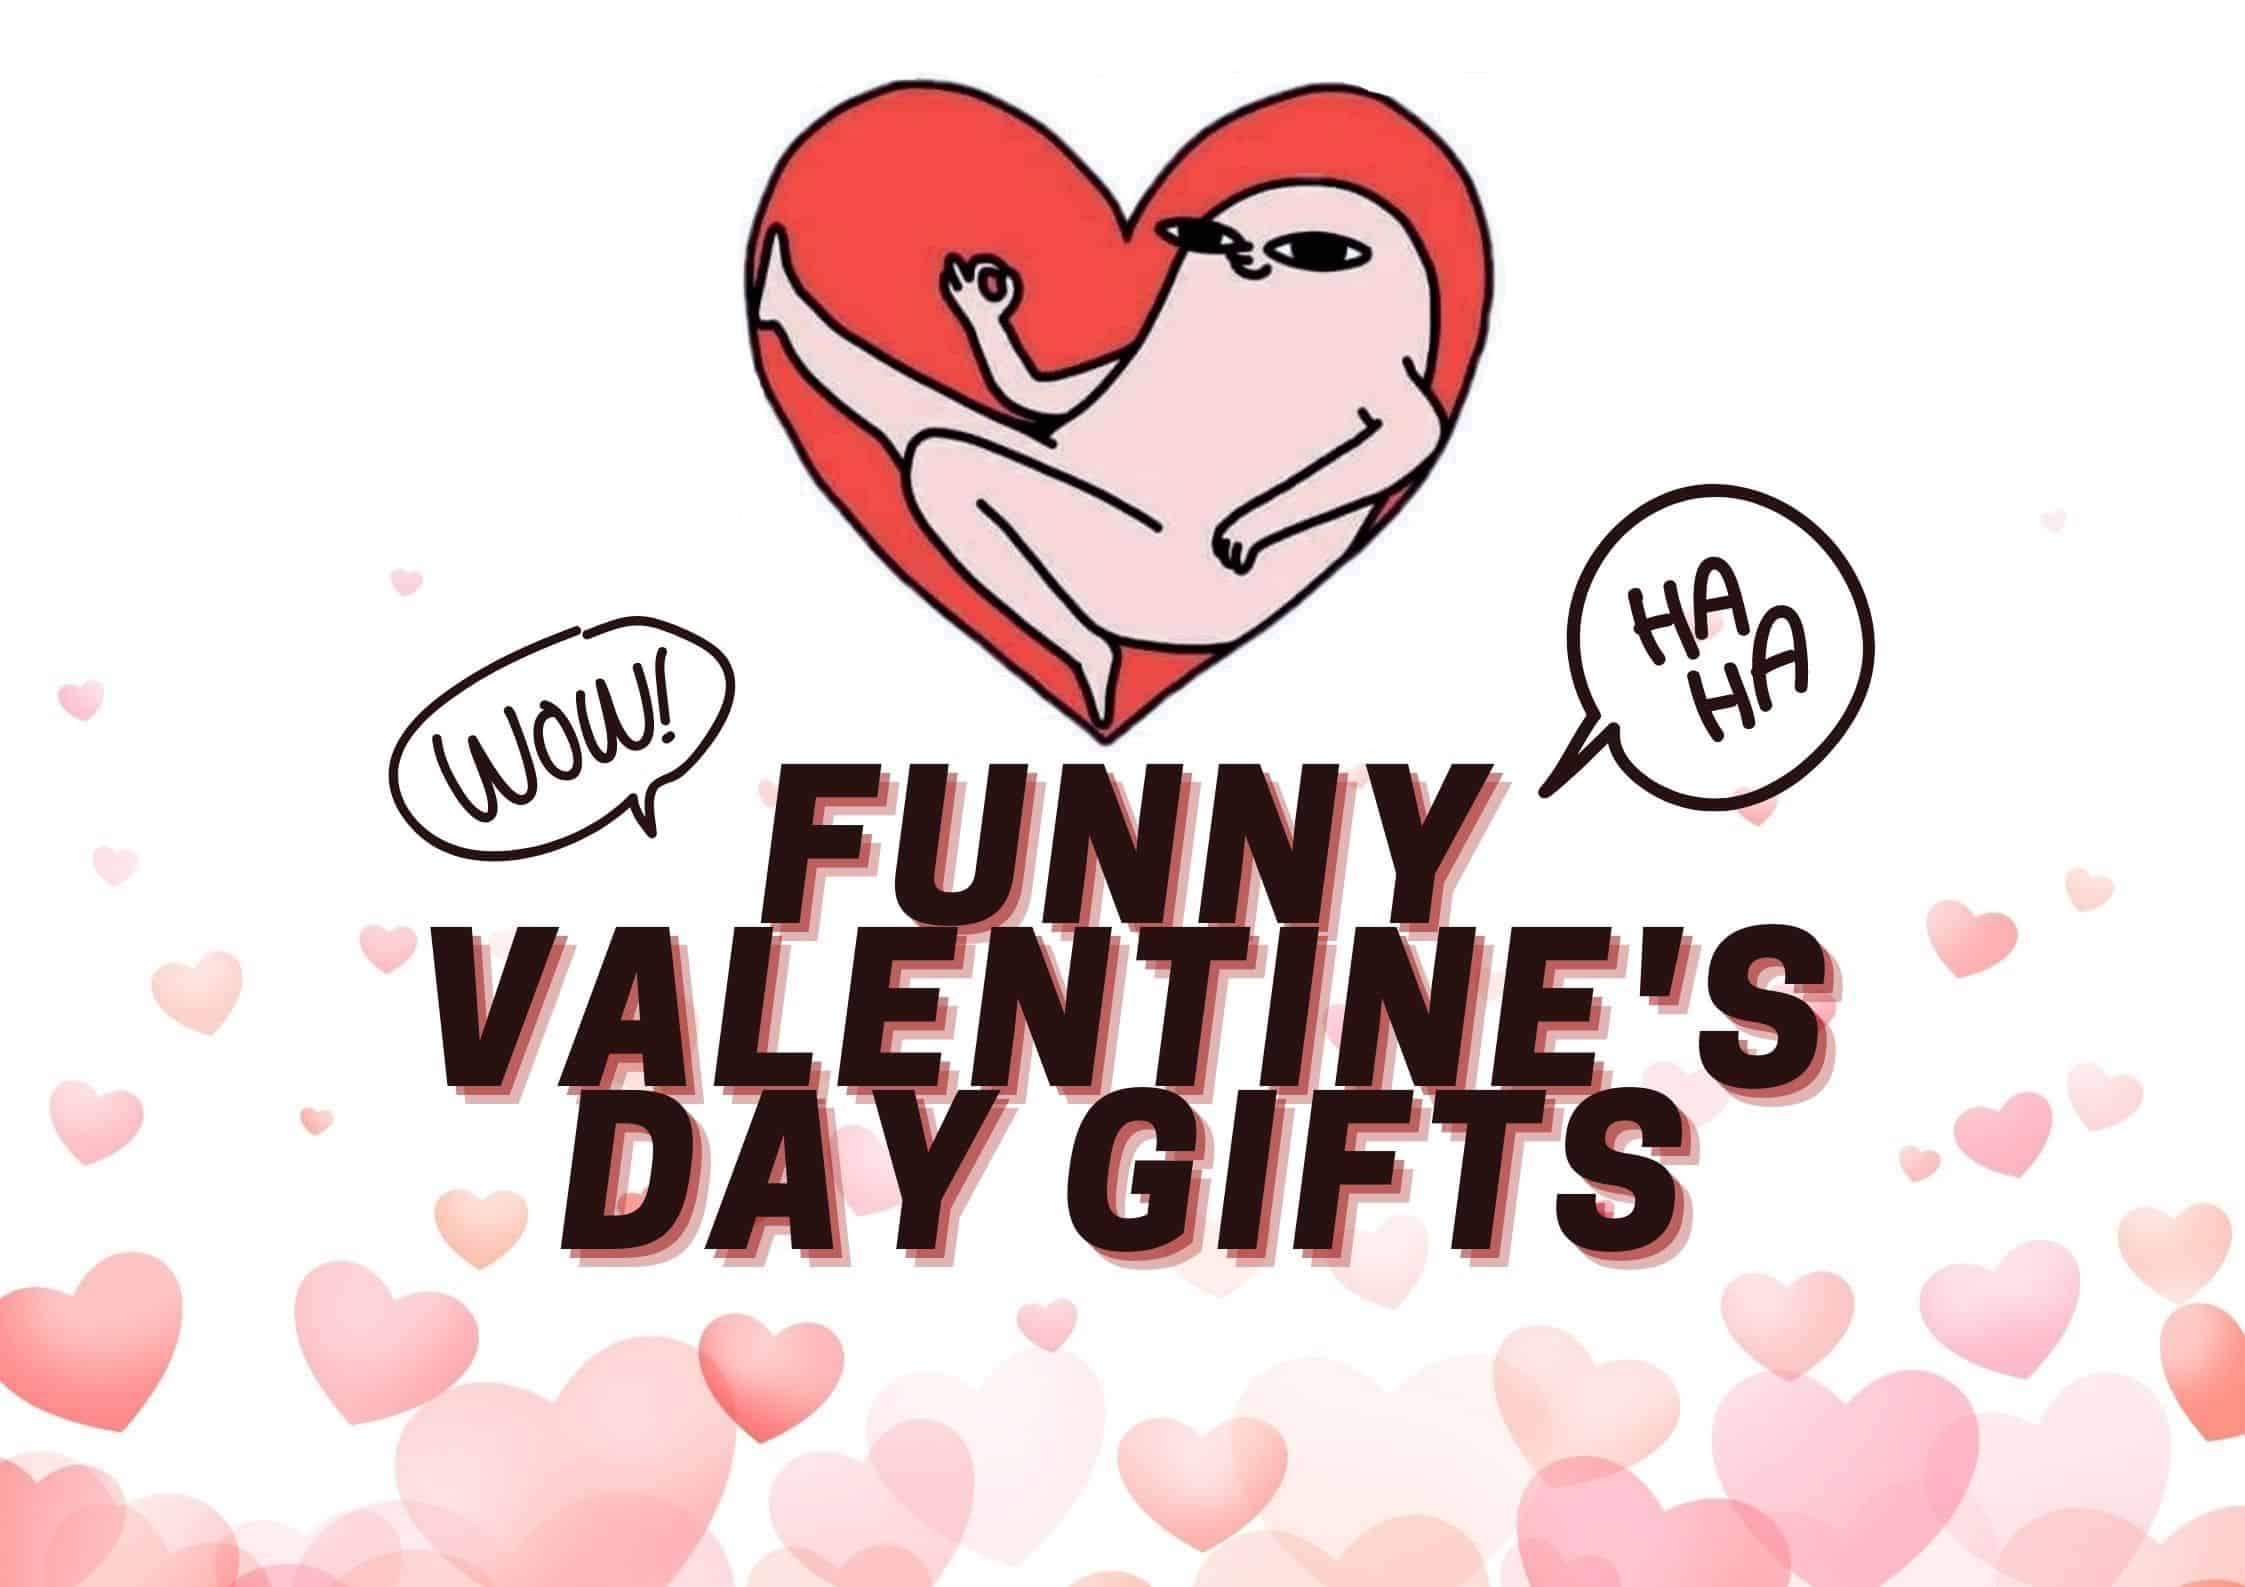 30+ Funny Valentines Day Gifts to Make More Laughter for Your Loved One (2022)